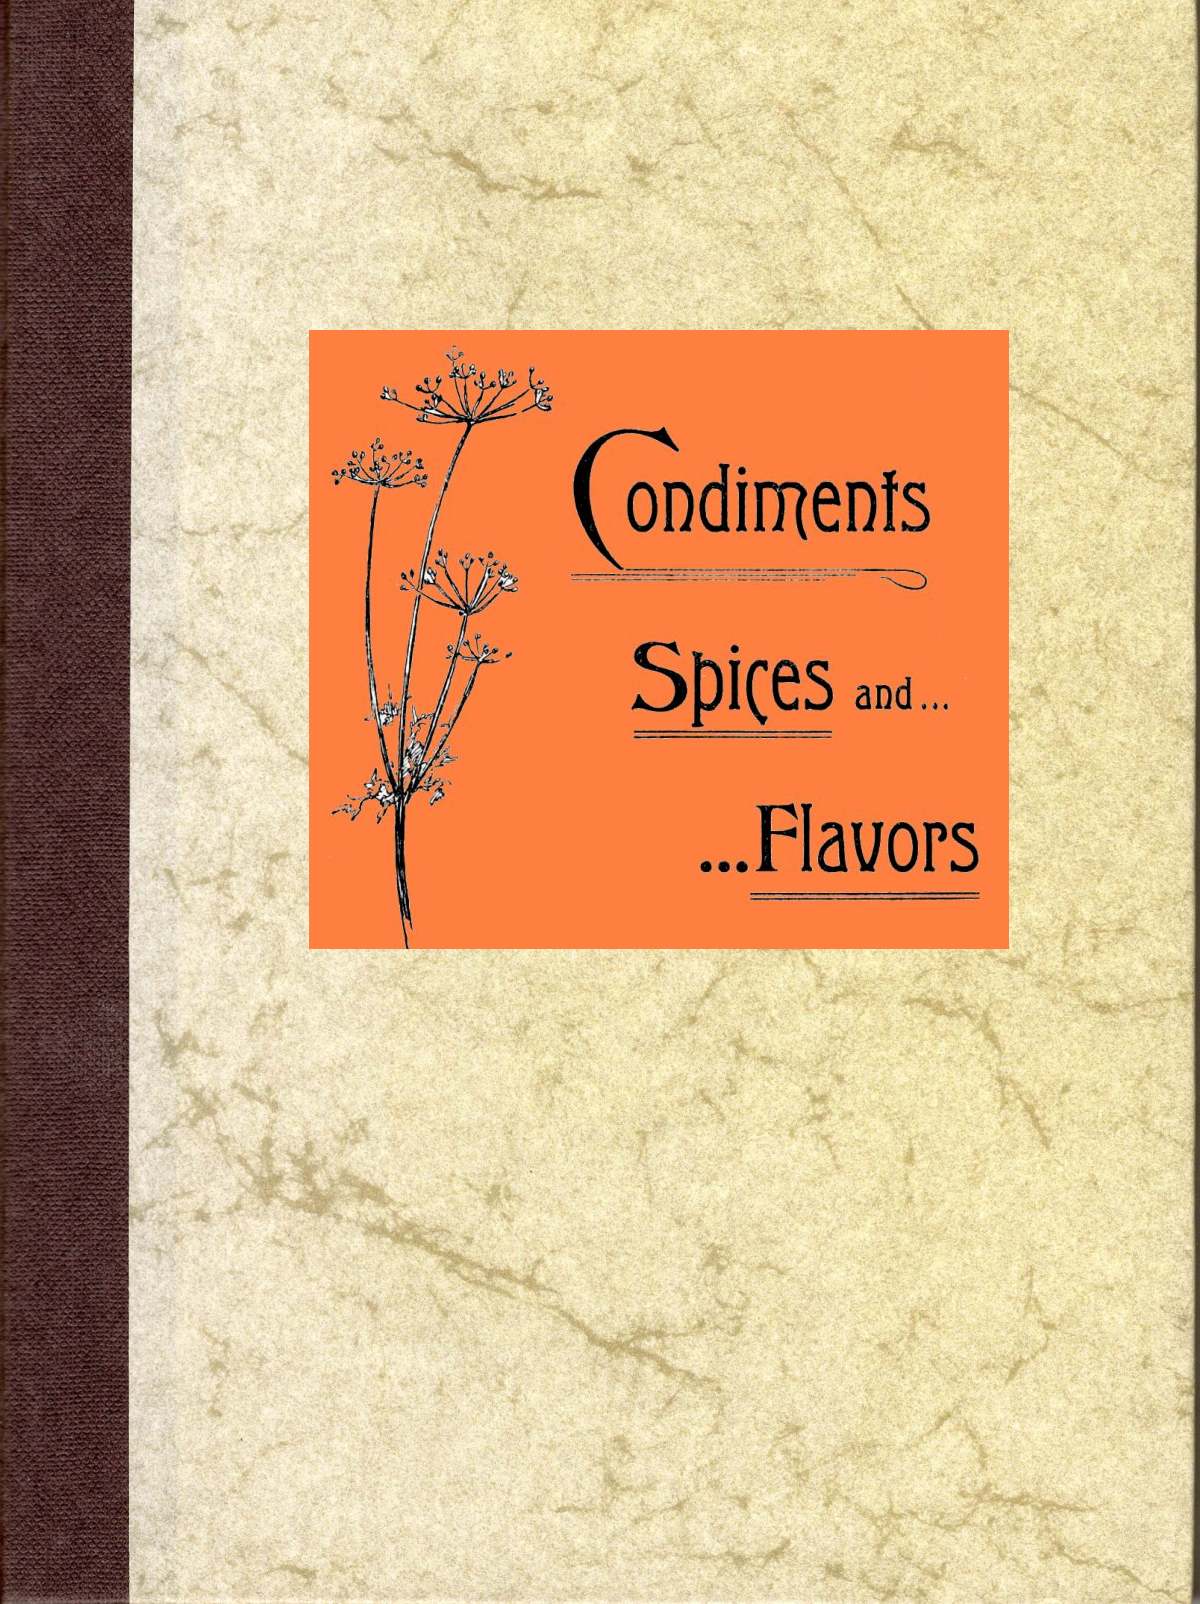 Condiments, Spices and Flavors